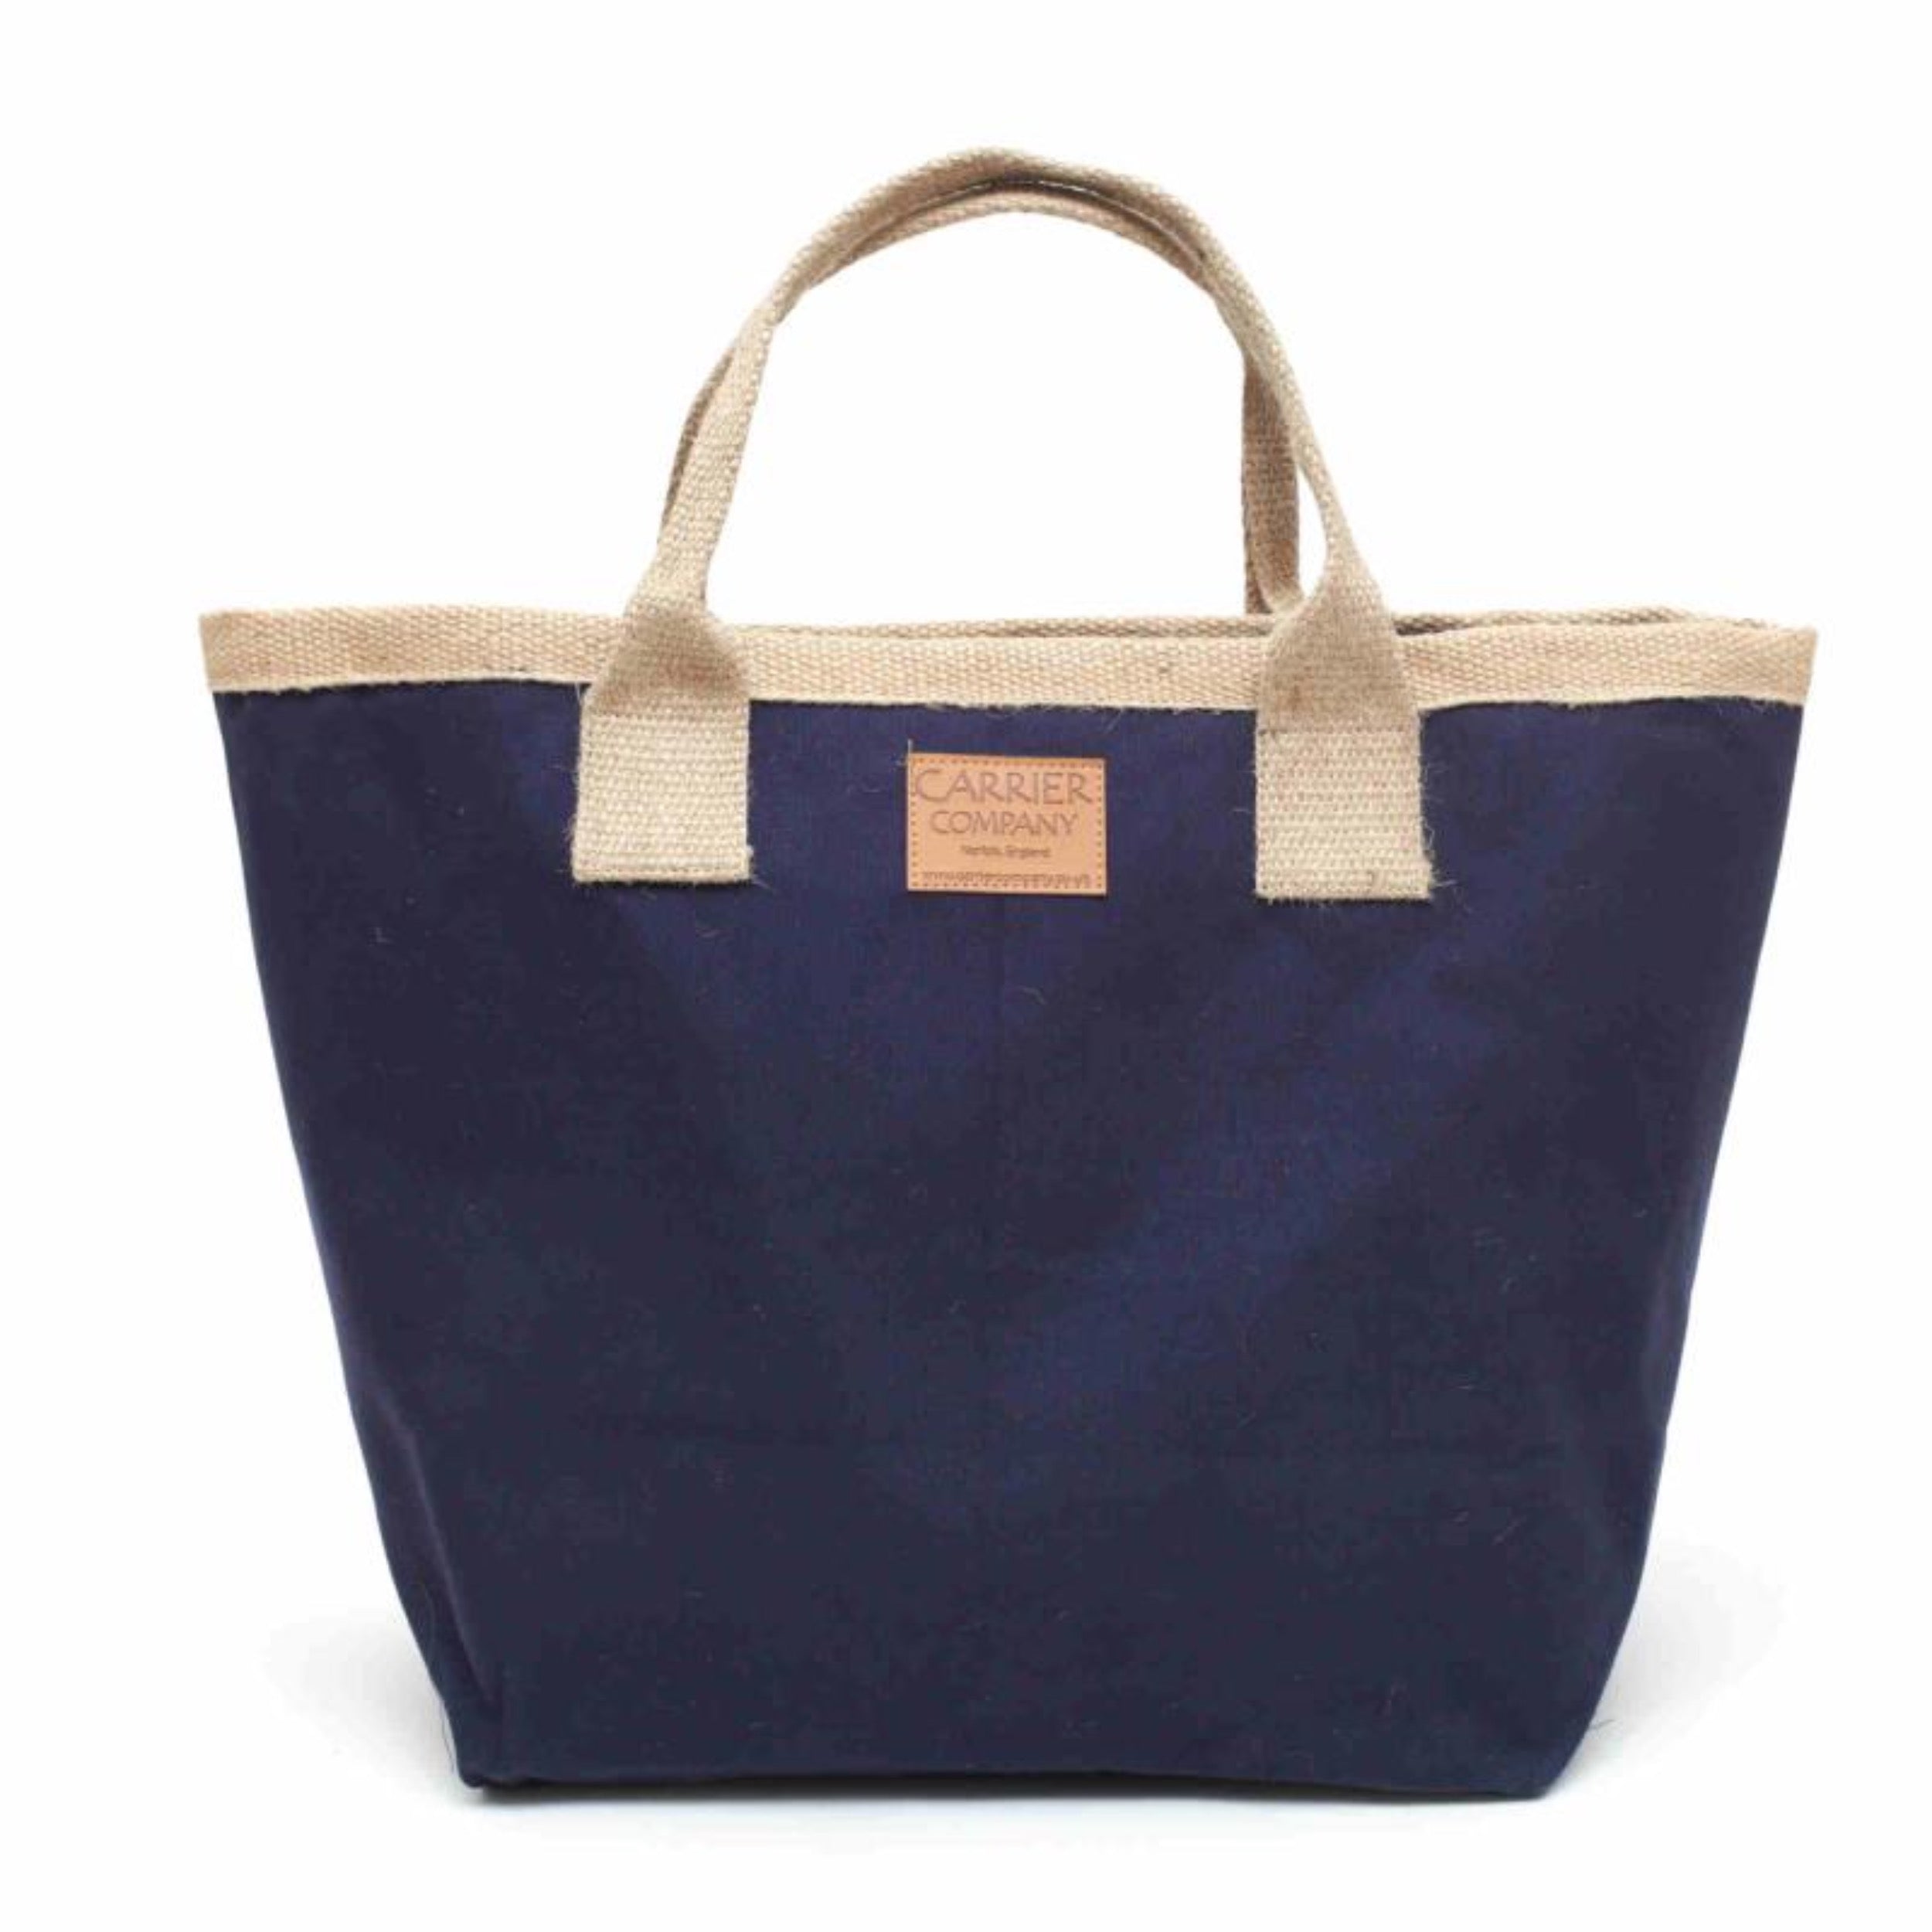 Carrier Company Sturdy Bag in Navy